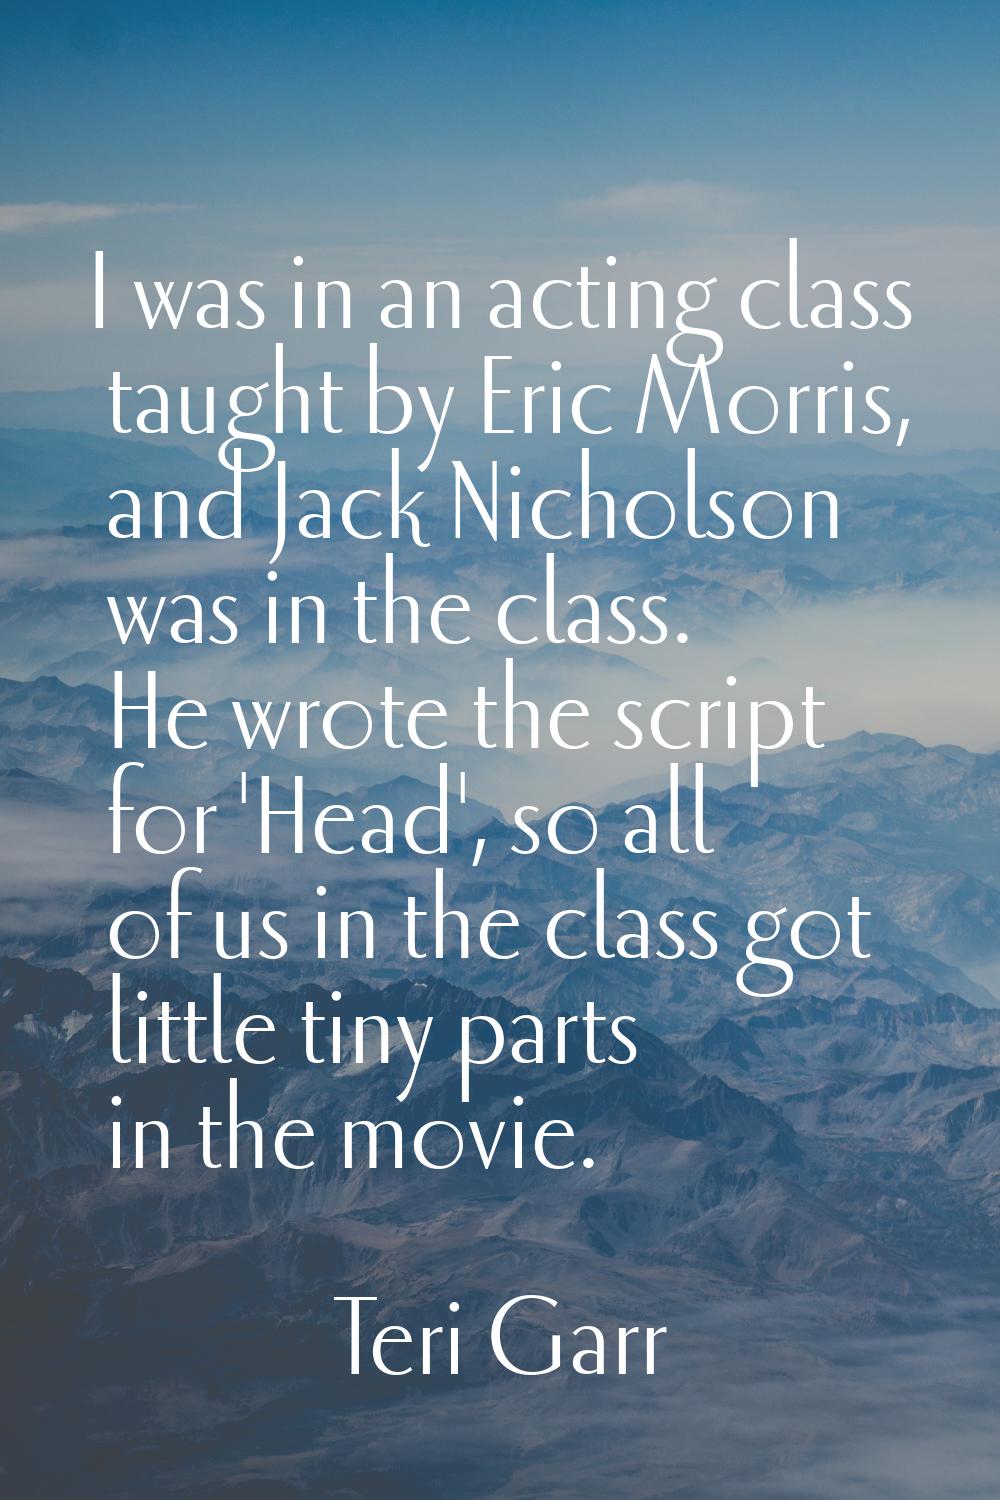 I was in an acting class taught by Eric Morris, and Jack Nicholson was in the class. He wrote the s